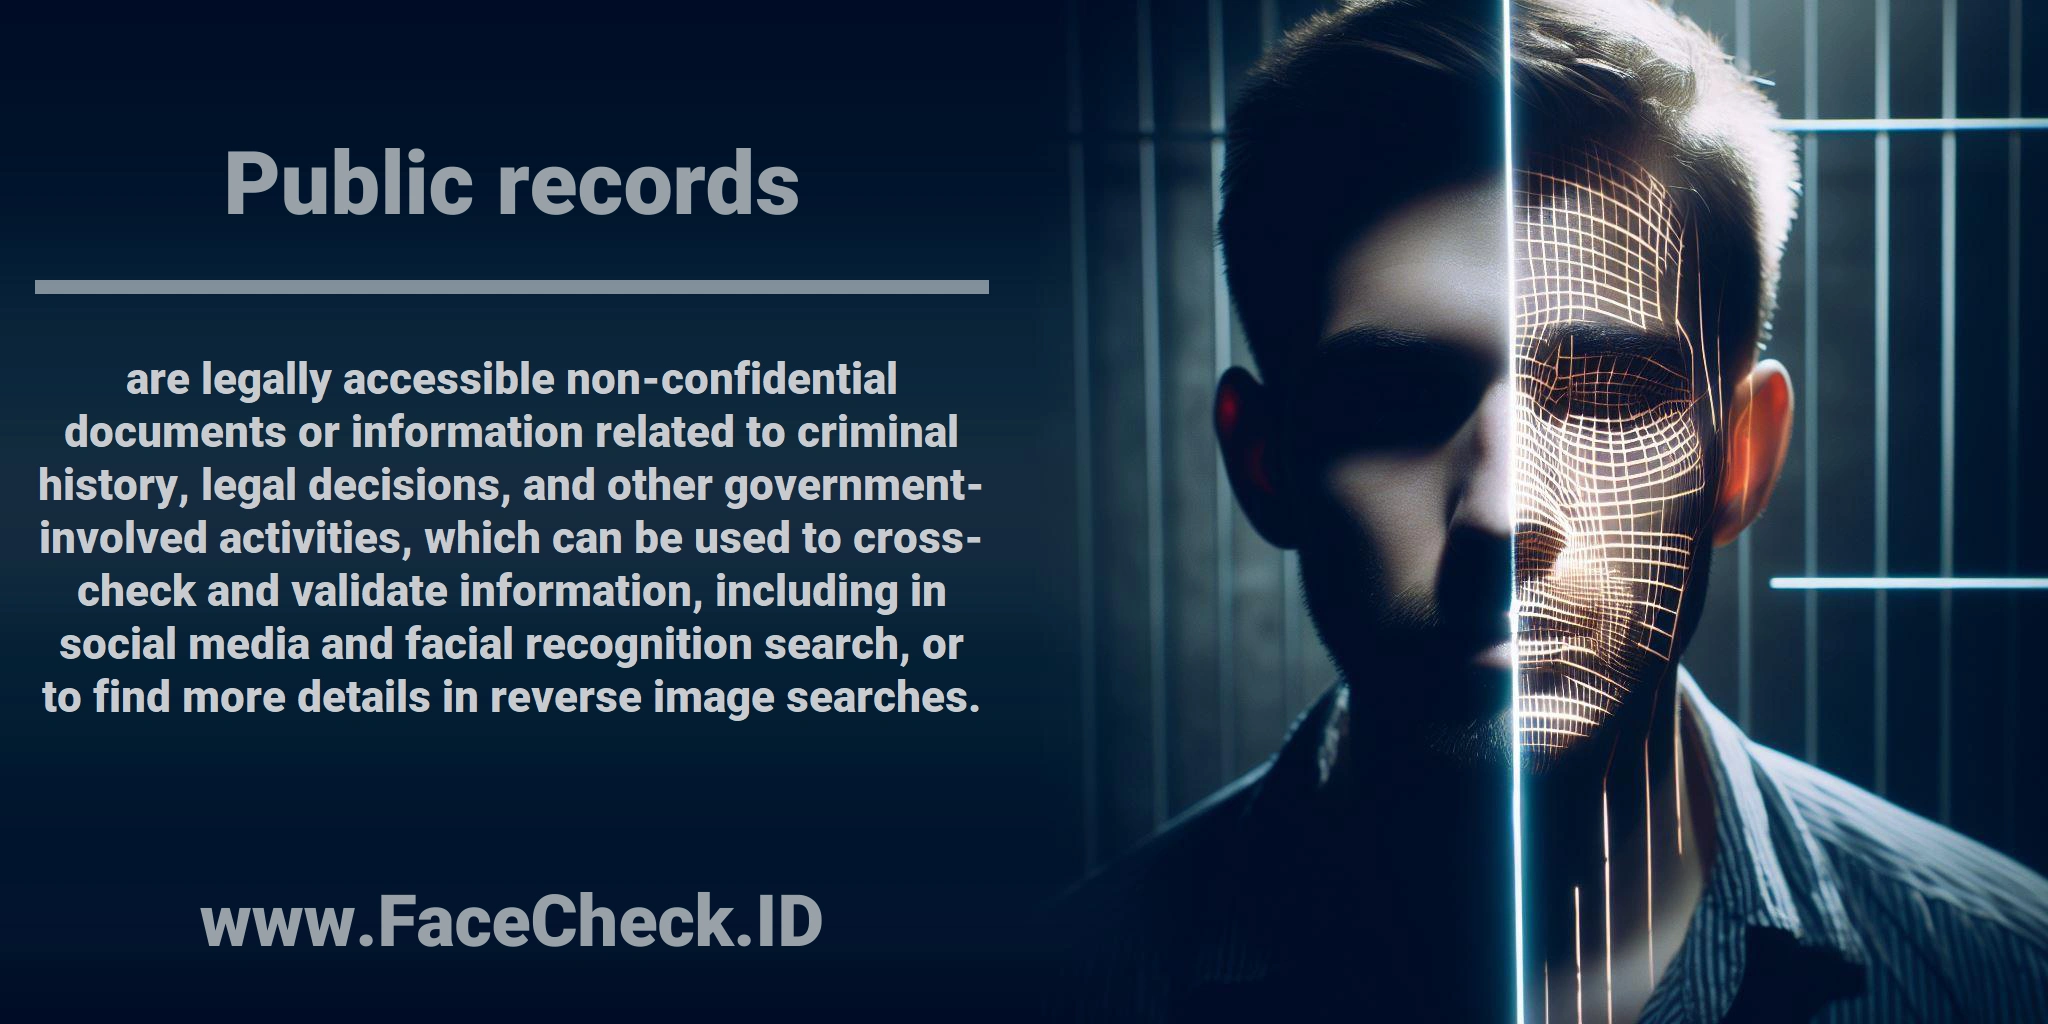 <b>Public records</b> are legally accessible non-confidential documents or information related to criminal history, legal decisions, and other government-involved activities, which can be used to cross-check and validate information, including in social media and facial recognition search, or to find more details in reverse image searches.